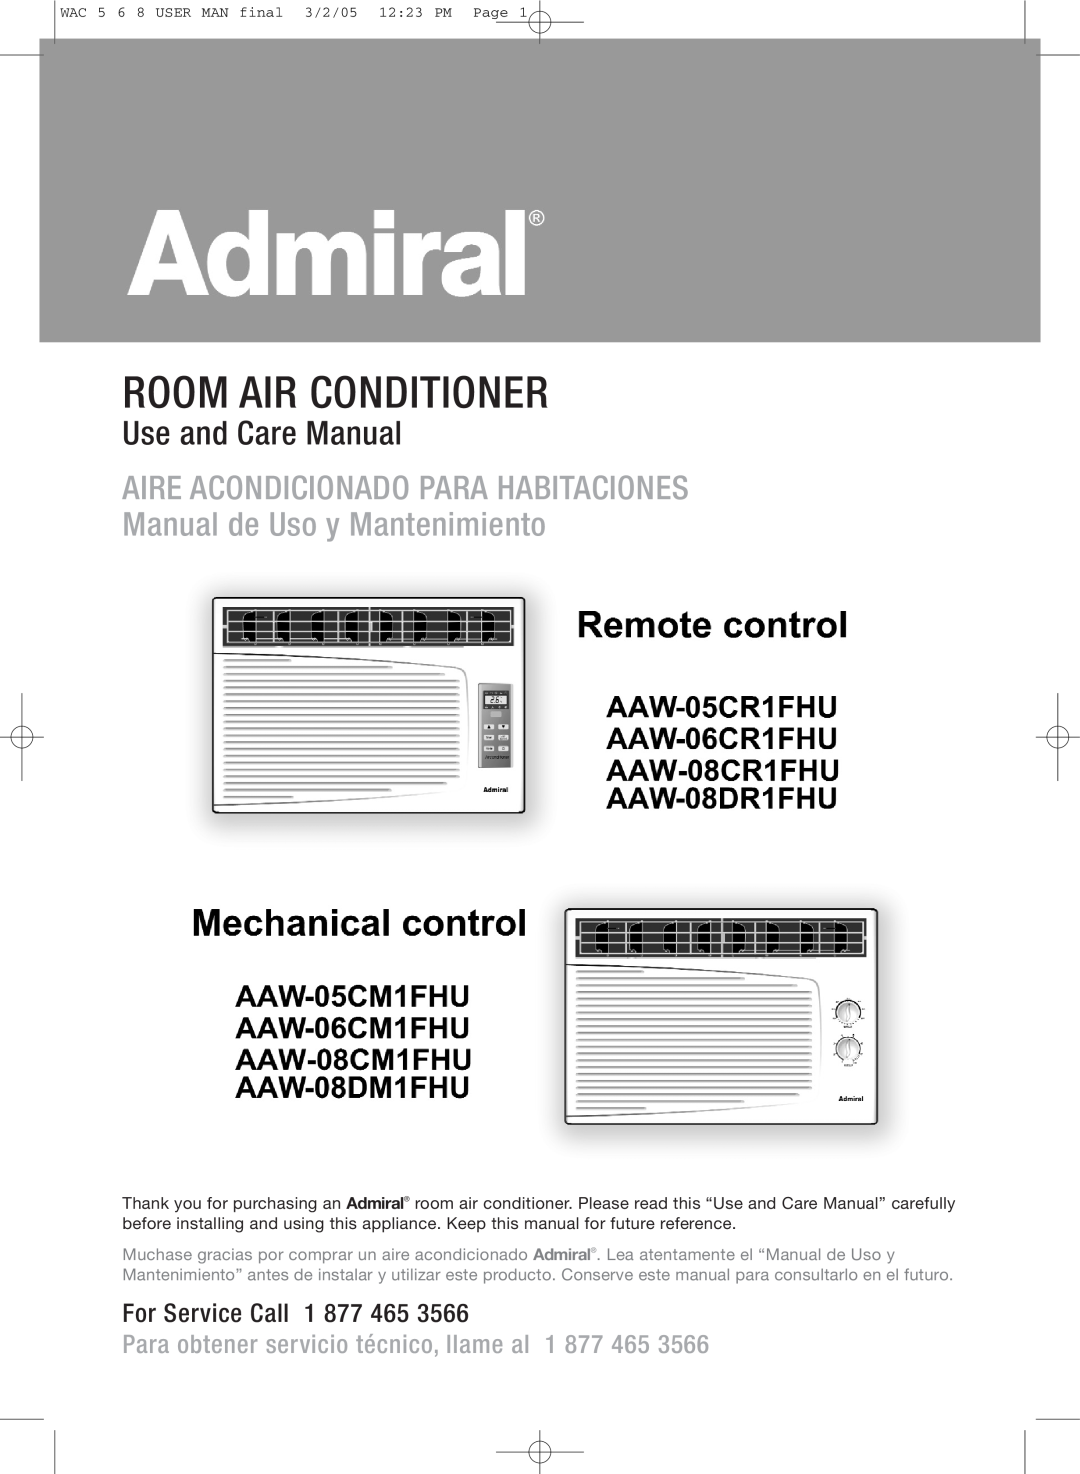 Admiral AAW-08CM1FHU, AAW-08CR1FHU, AAW-06CR1FHU manual Room Air Conditioner, Use and Care Manual, For Service Call 